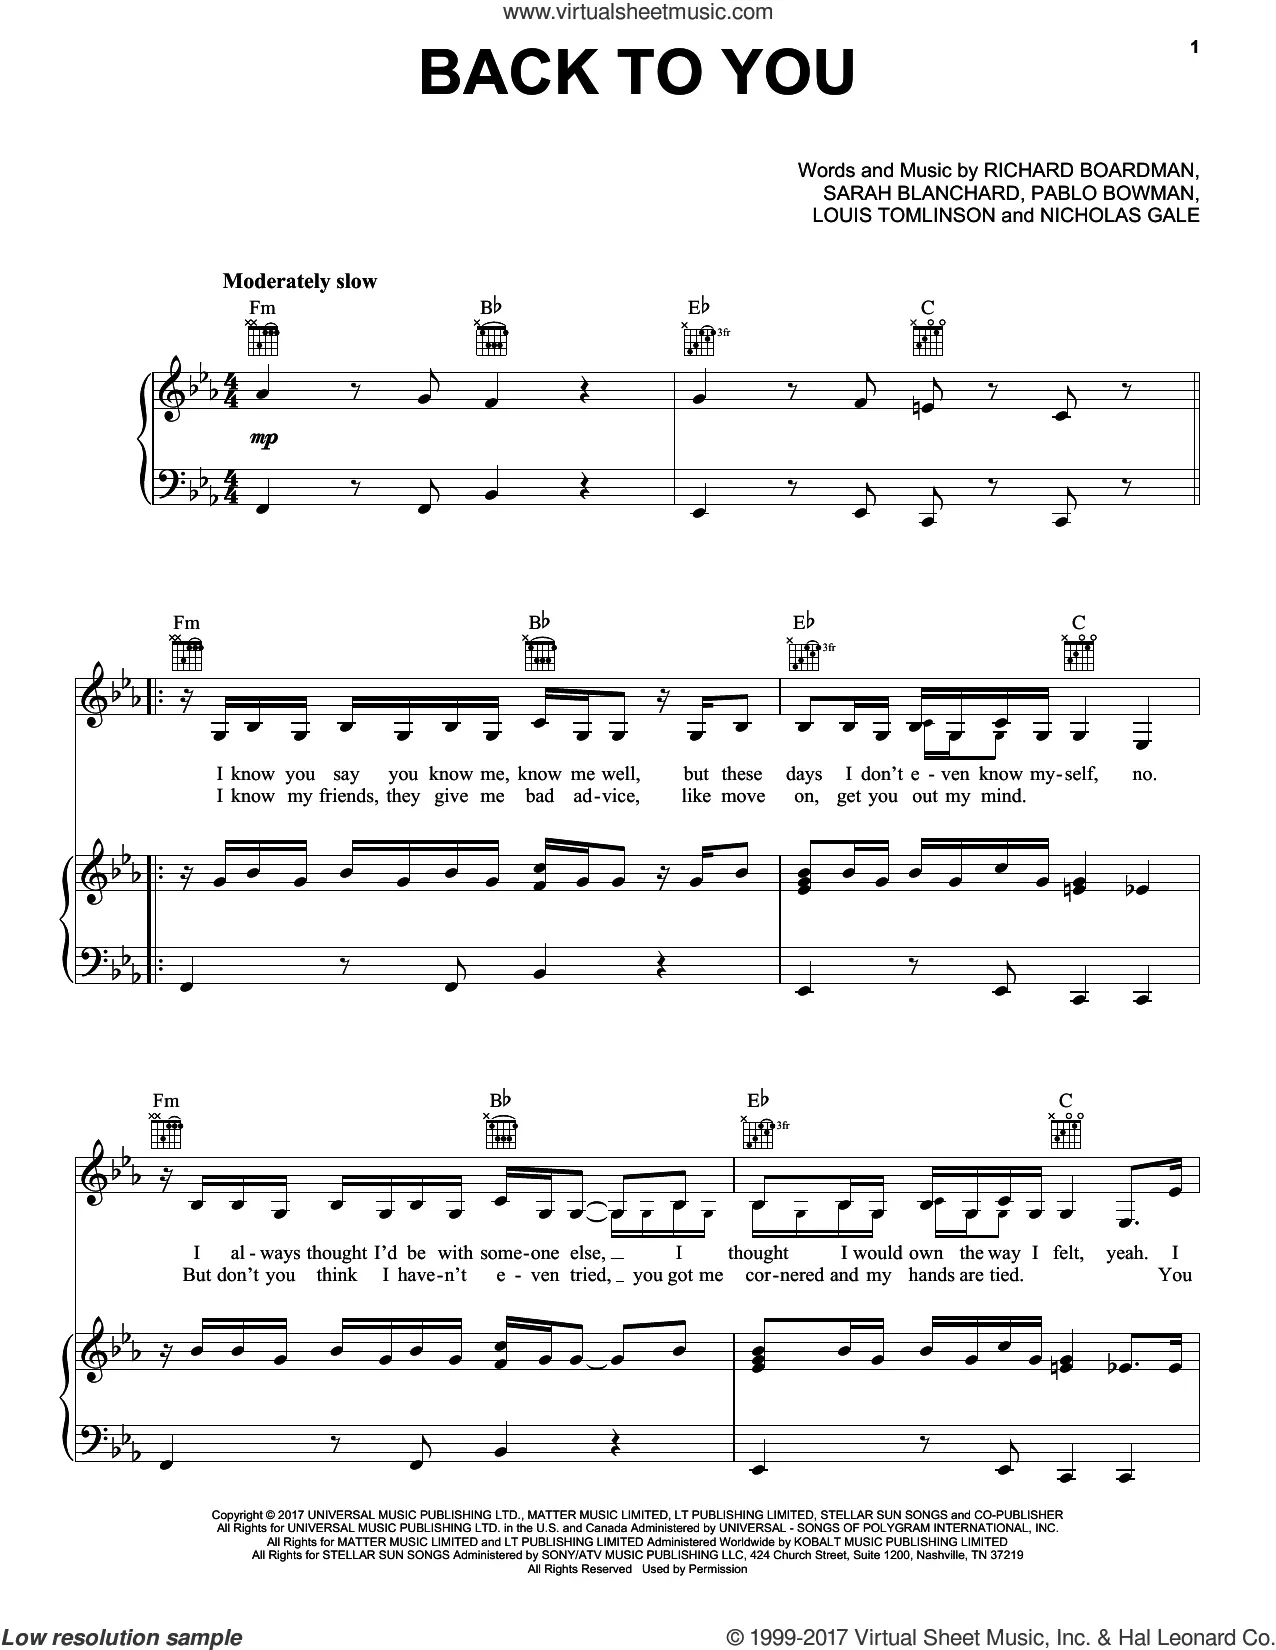 Louis Tomlinson - High In California - Piano Tutorial - Free download sheet  music and MIDI 